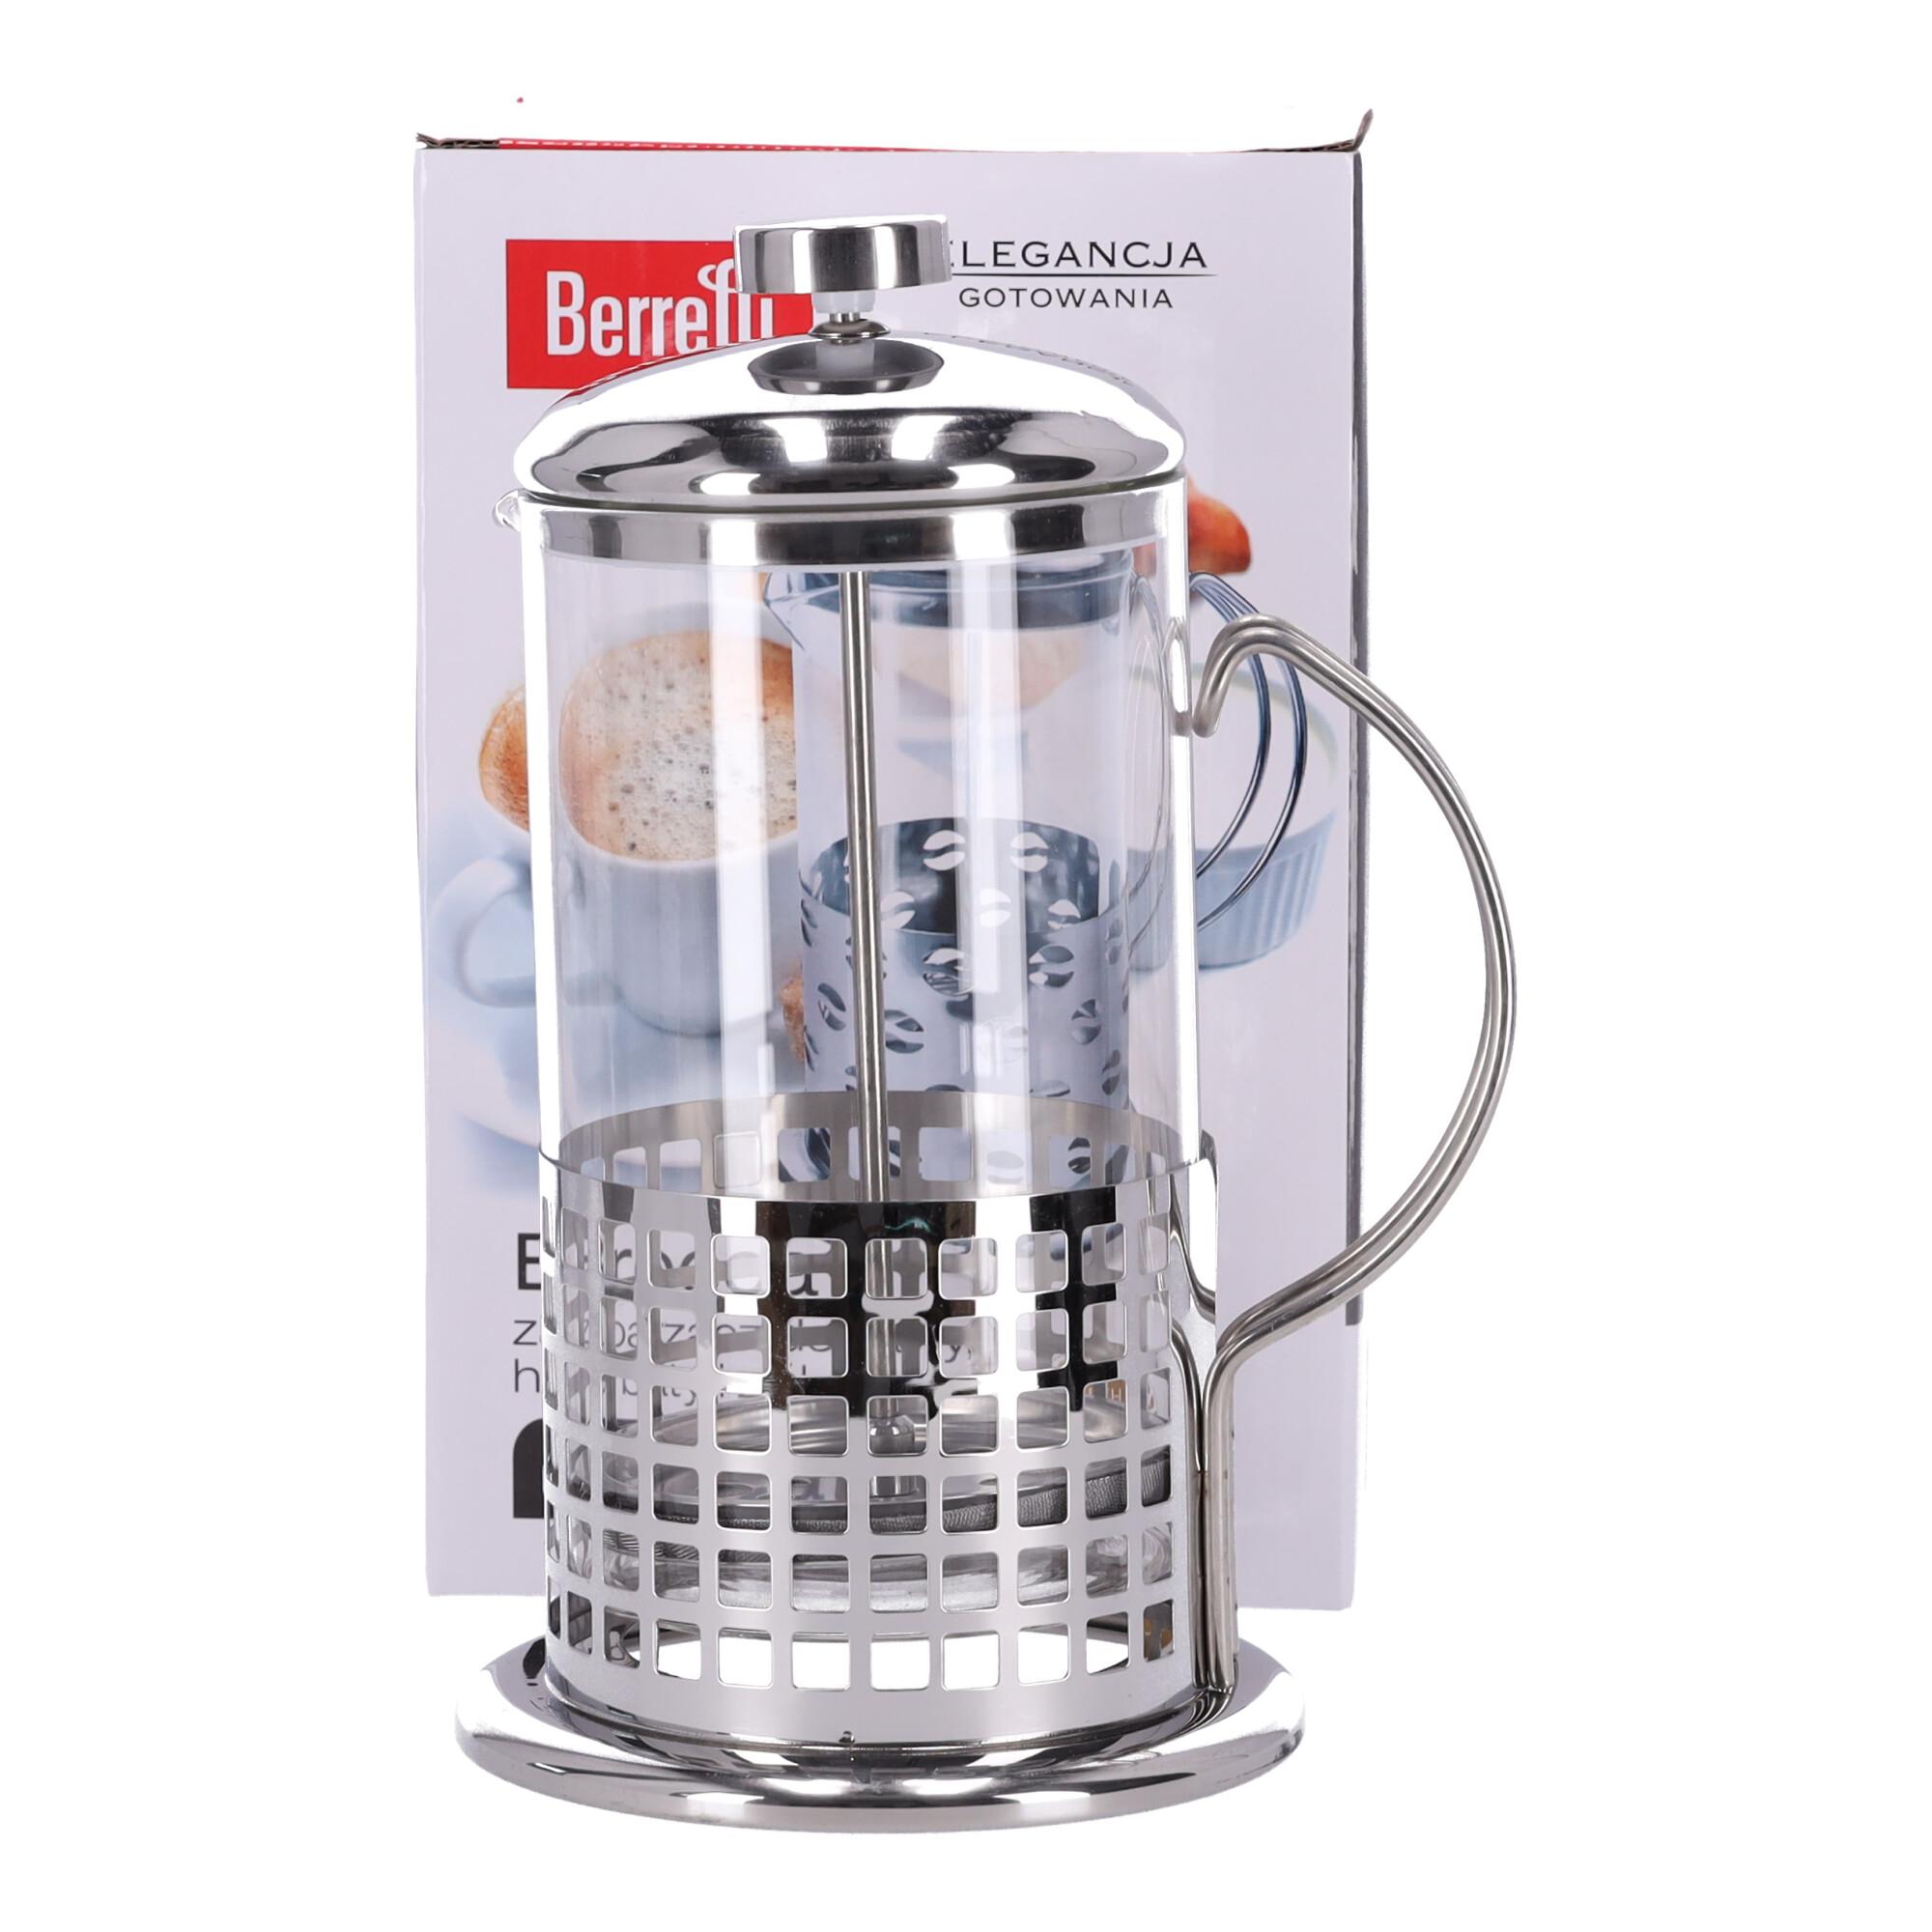 Stainless steel brewer with plunger Brocca BERRETTI, 800 ml grille